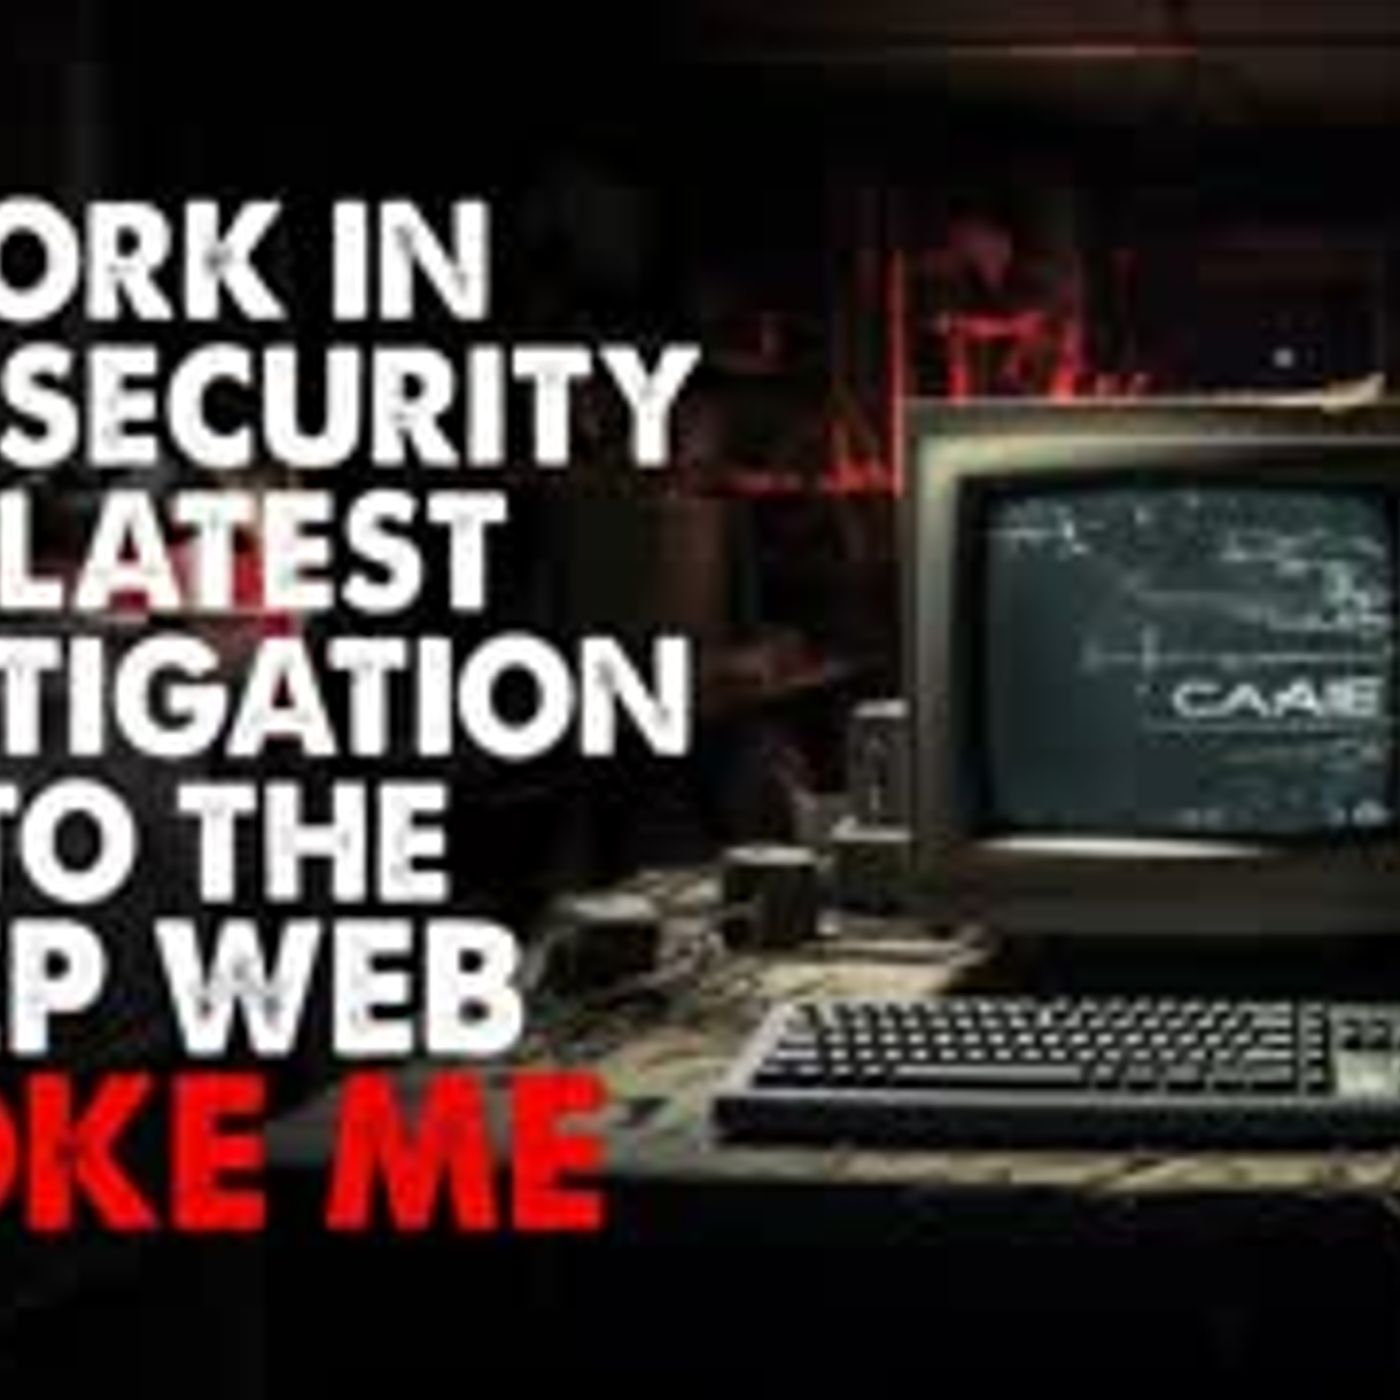 ”I work in cybersecurity, and my latest investigation into the deep web broke me” Creepypasta